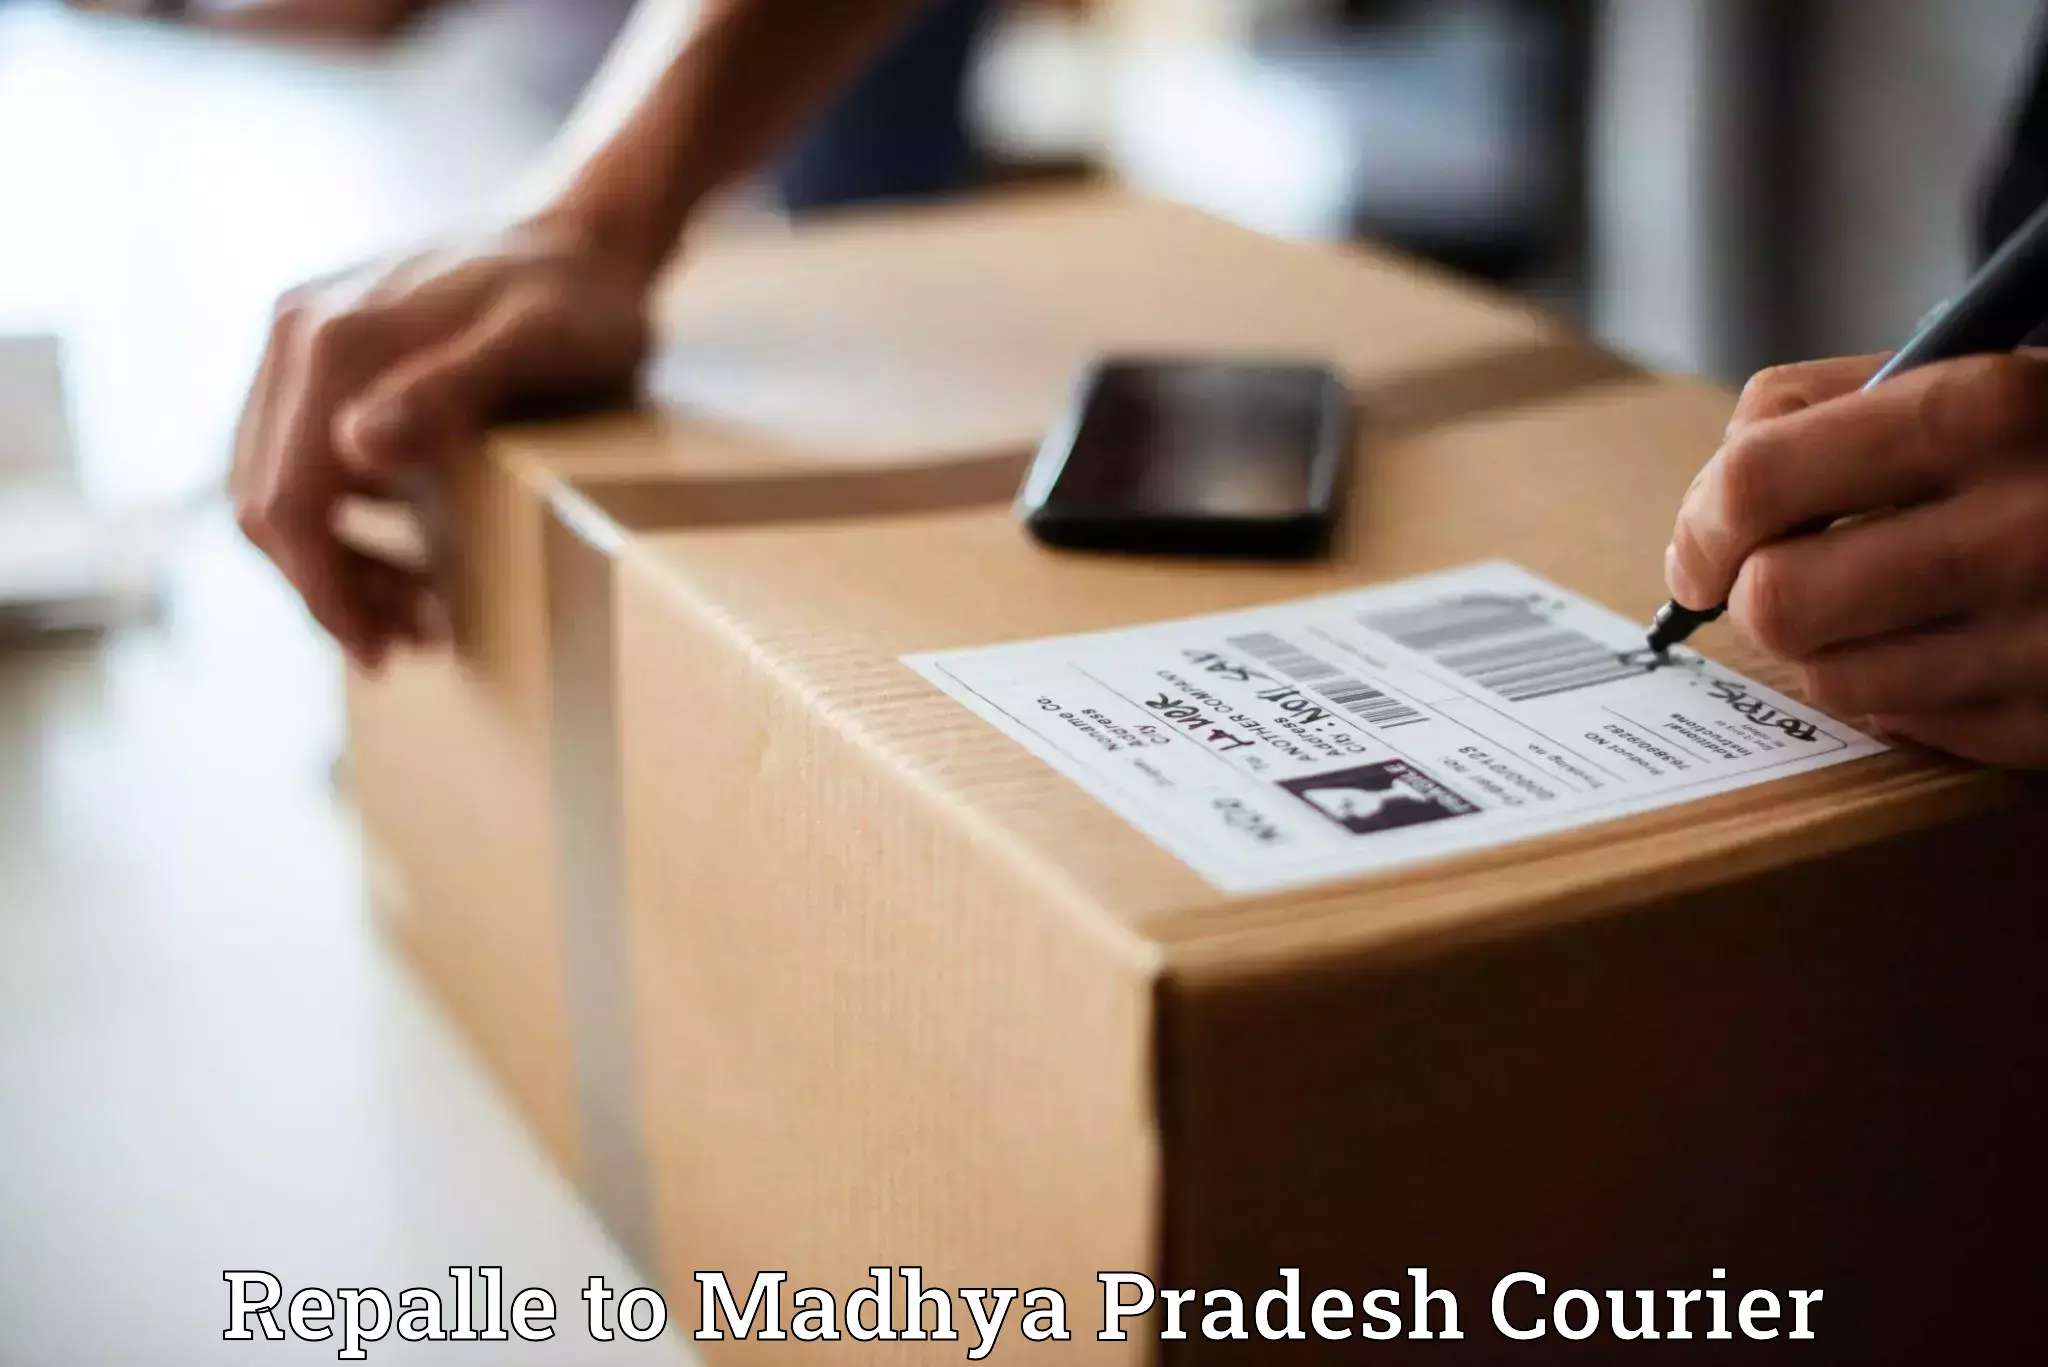 State-of-the-art courier technology Repalle to Waraseoni